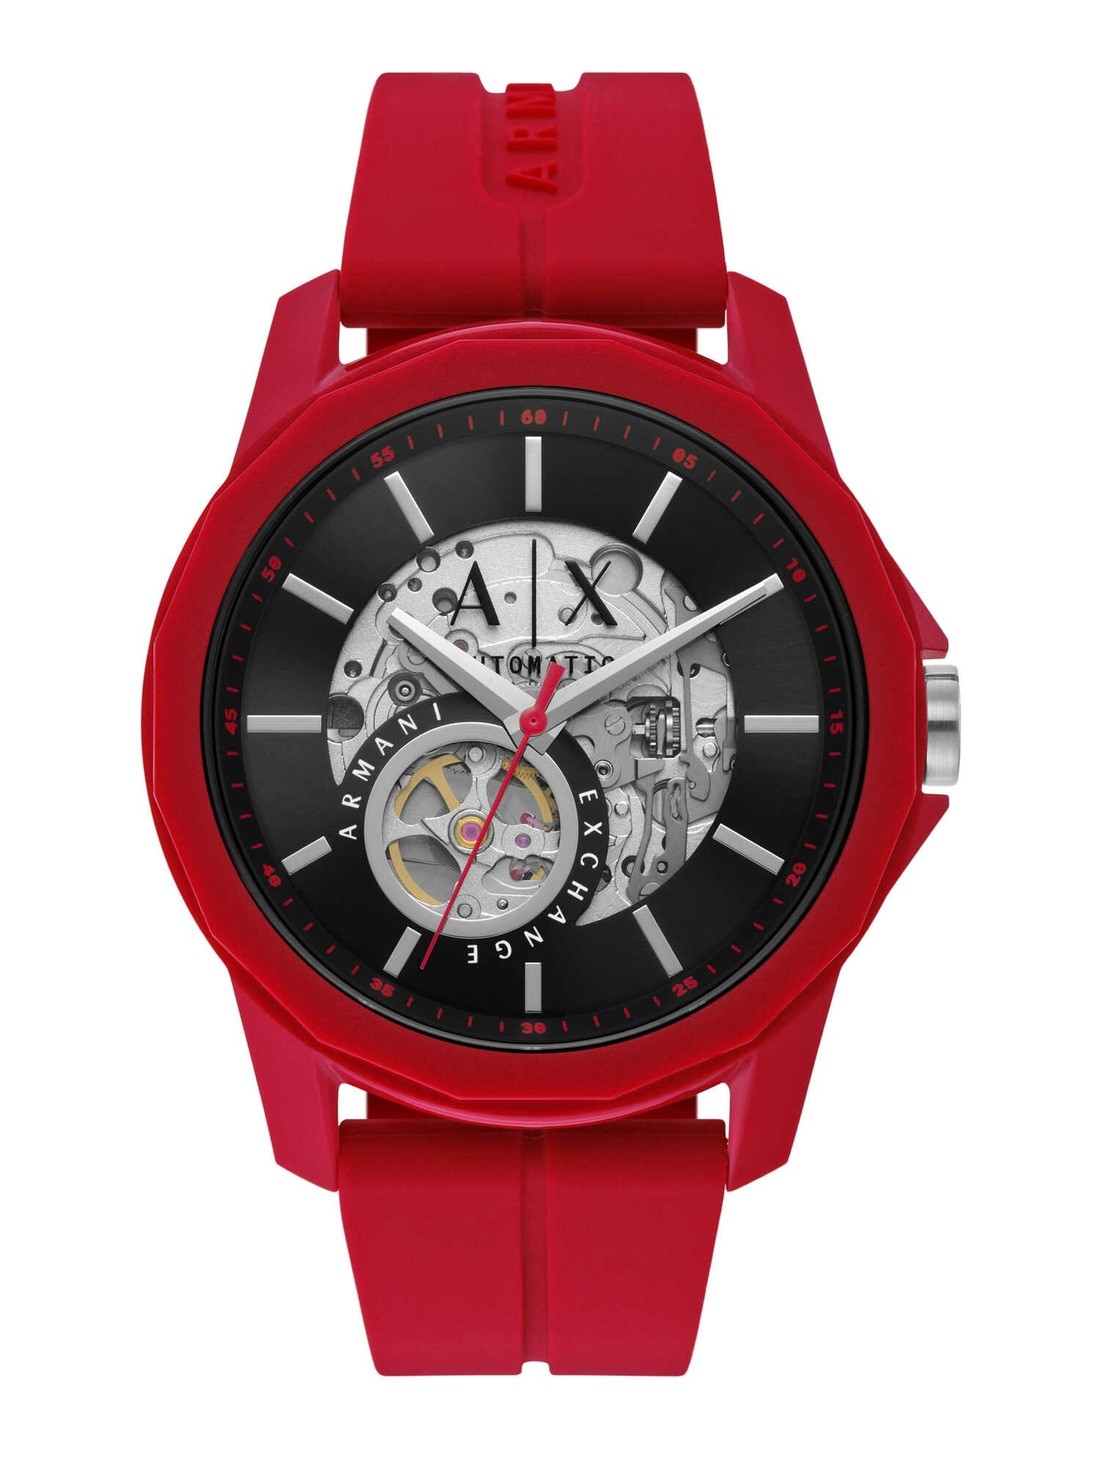 Armani Exchange Red Watch AX1728 - Watch Station India